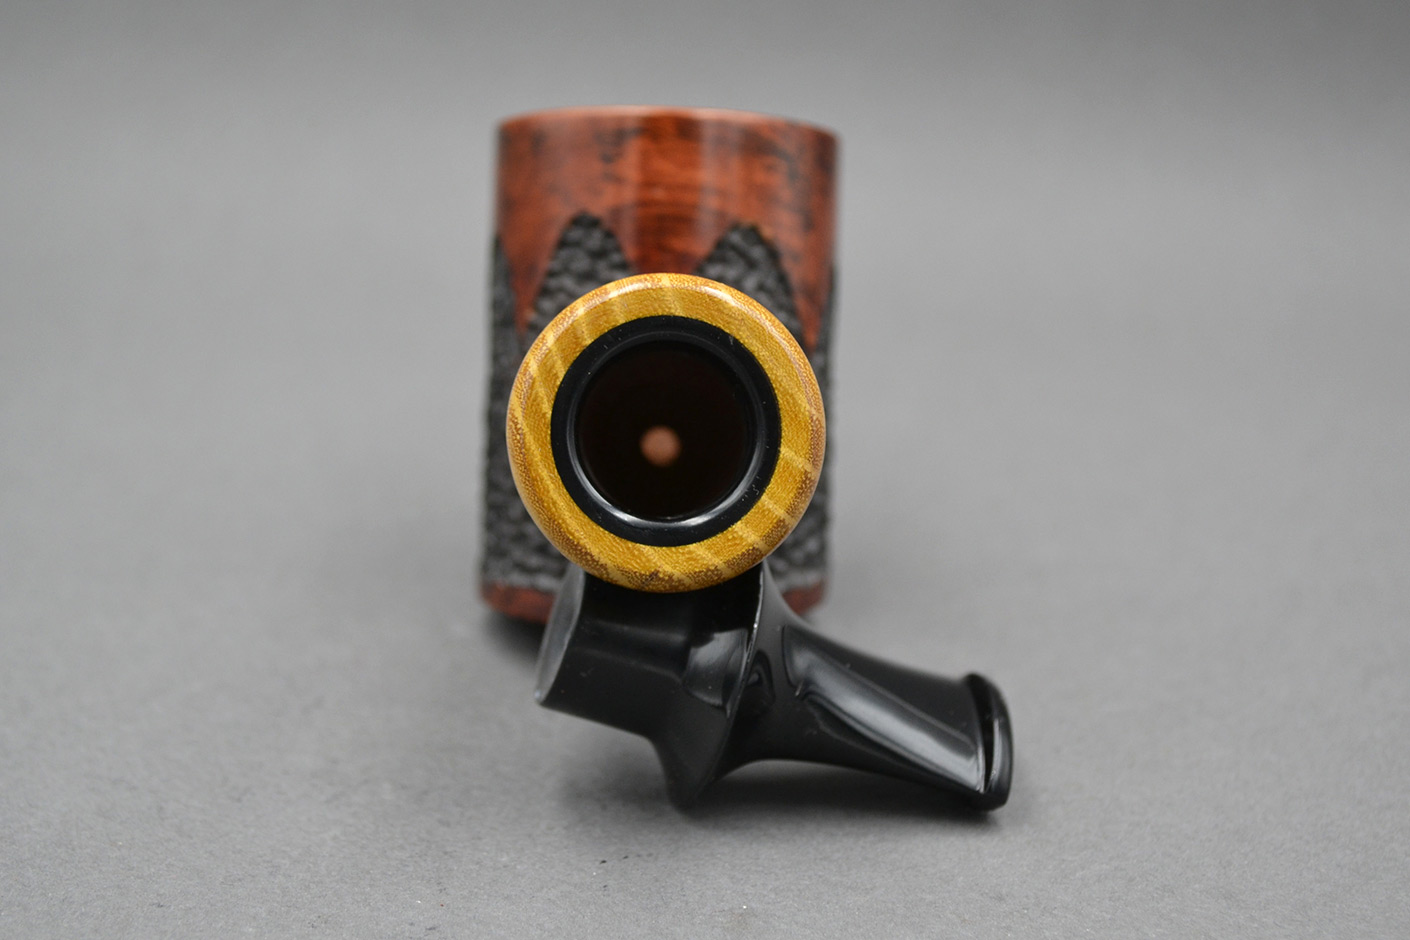 King Reverse Calabash 21133 Handmade Briar Tobacco Pipe by Constantinos Zissis 01